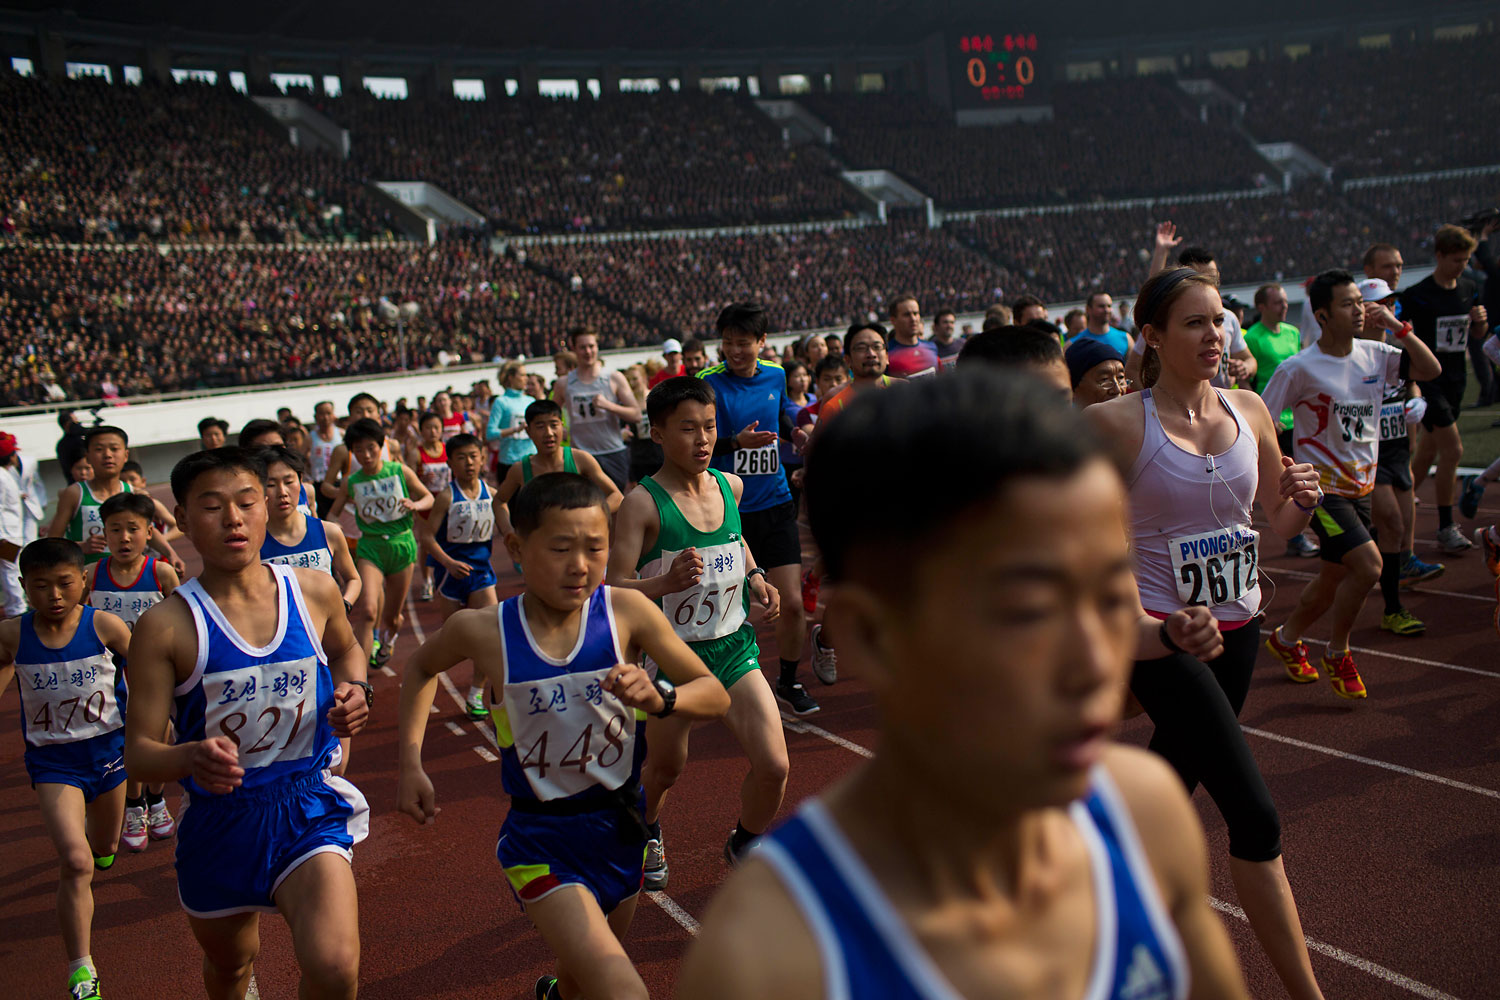 Runners take off from the starting line inside Kim Il Sung Stadium at the beginning of the Mangyongdae Prize International Marathon in Pyongyang, North Korea on April 13, 2014.